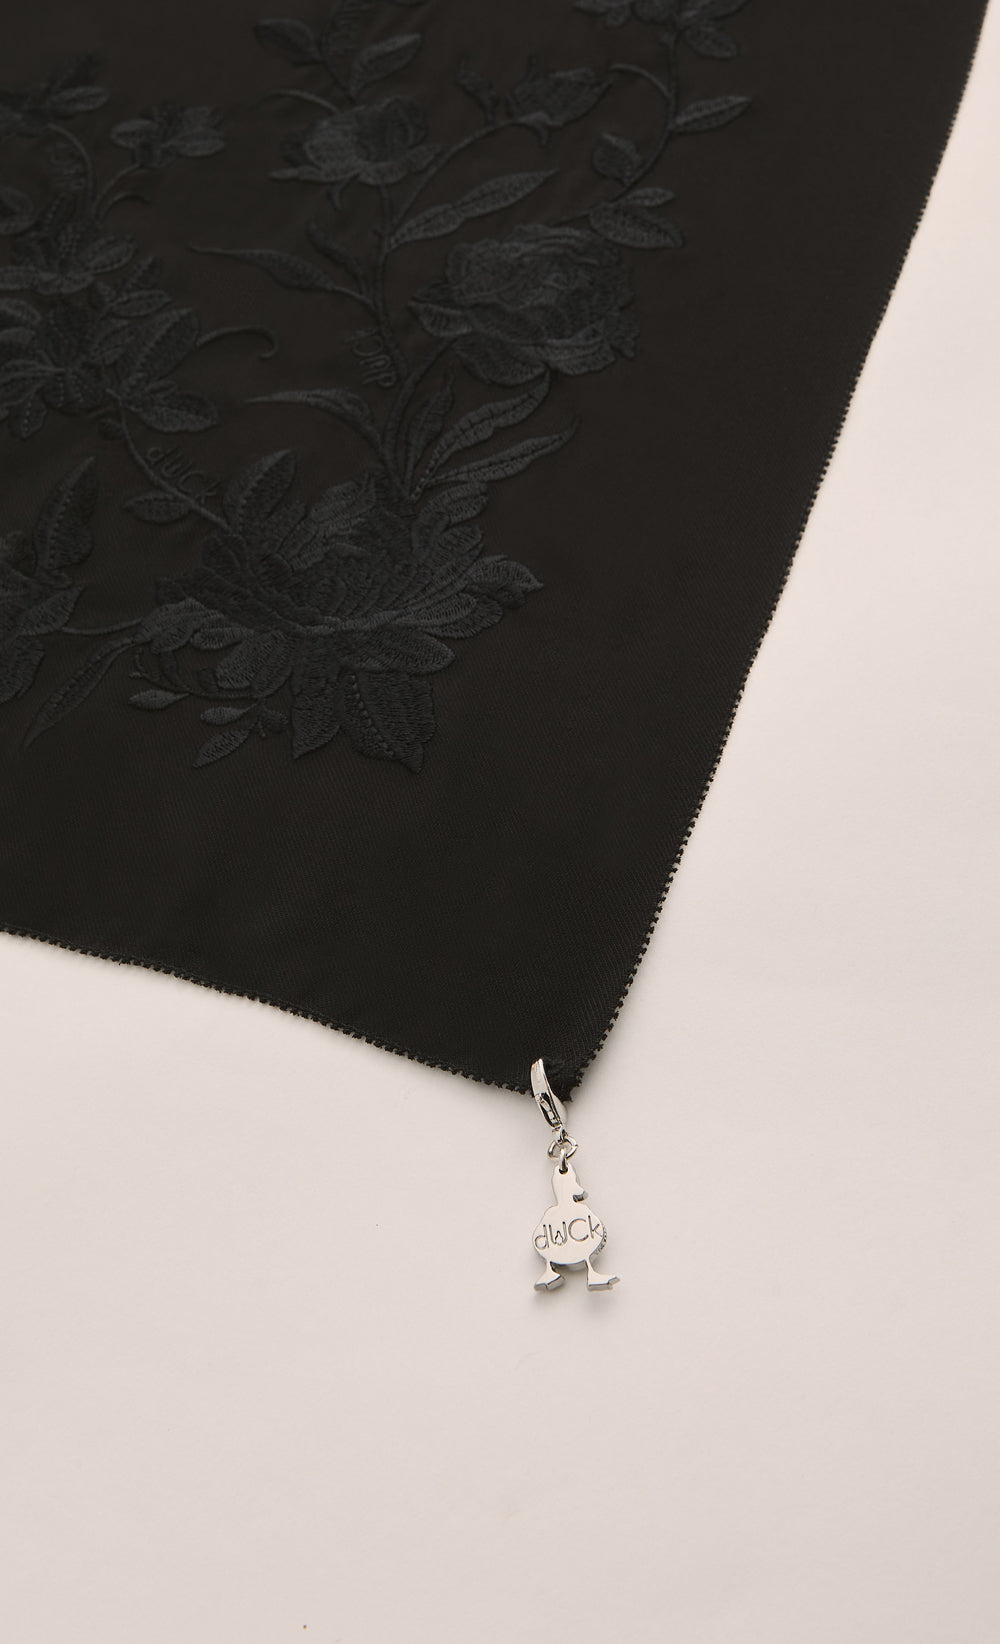 The Peonies Embroidery dUCk Shawl in Black